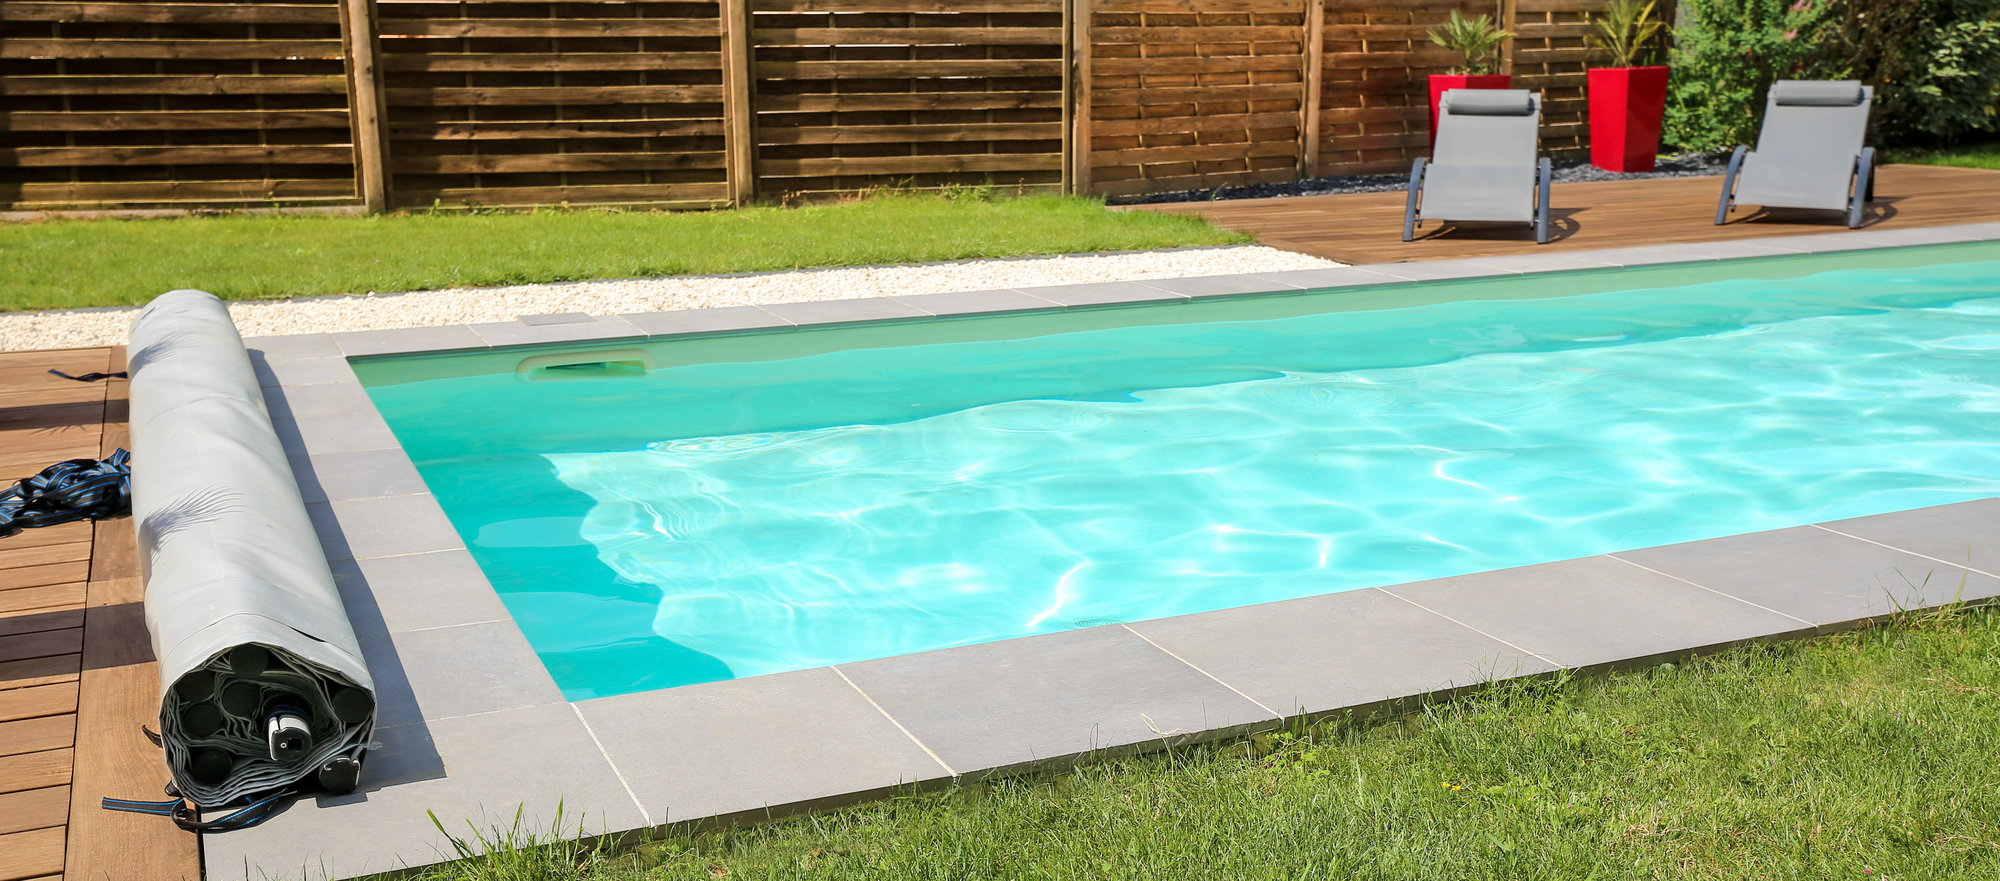 How to Make Your Own Inground Pool Covers | DoItYourself.com